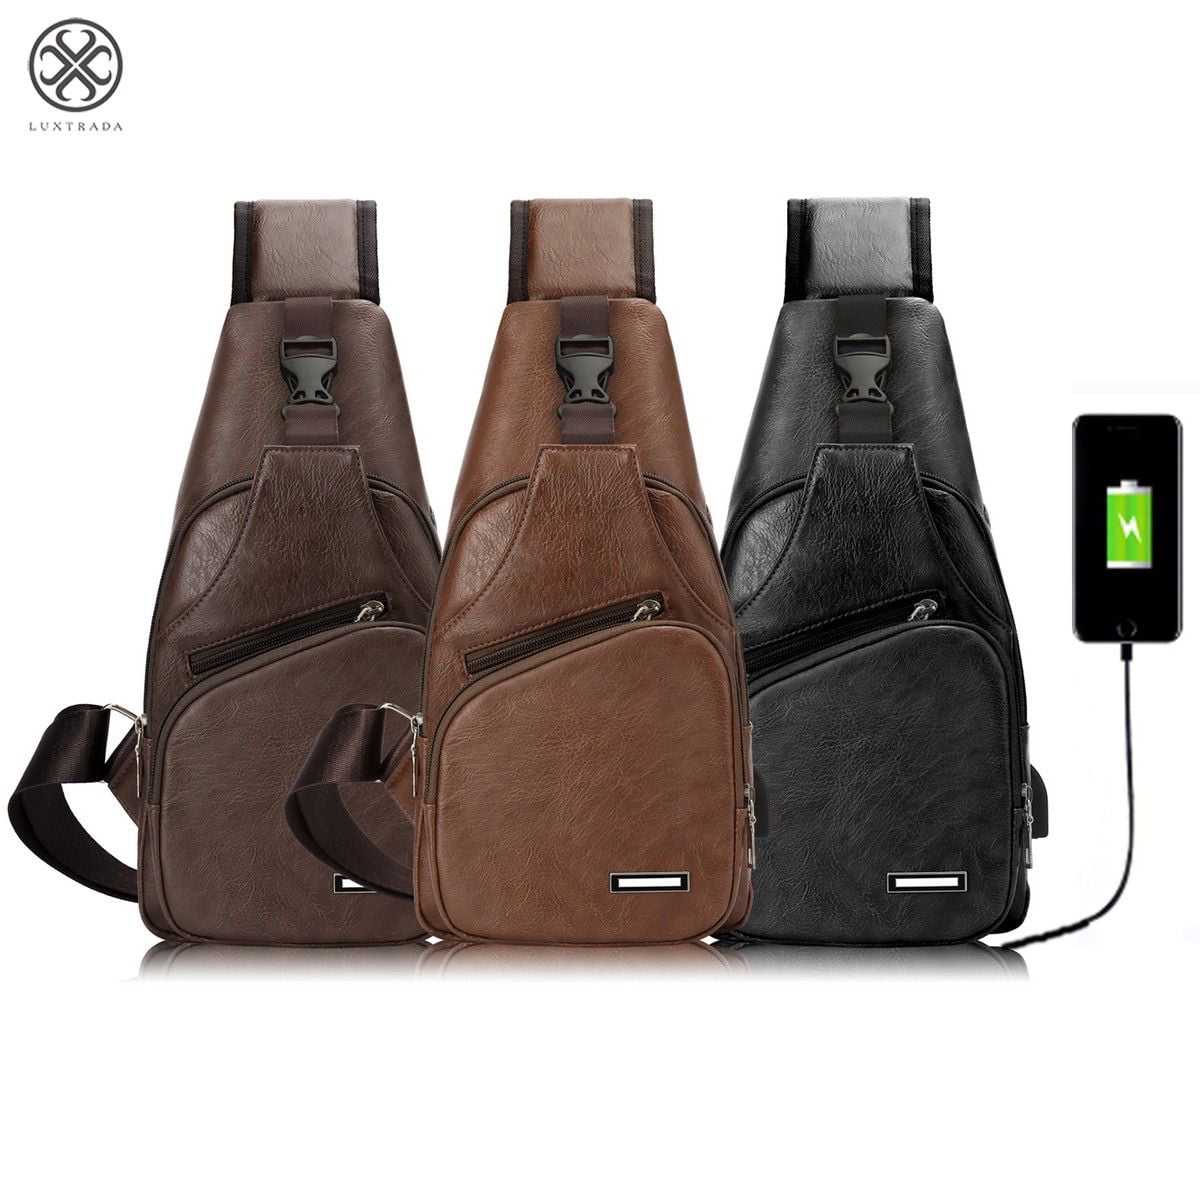 pay off profile Initially Luxtrada Sling Backpack Anti-Theft Leather Bag One Strap Crossbody Shoulder  for Travel Sport Hiking Daypacks for Men Women with USB Charging Port -  Walmart.com